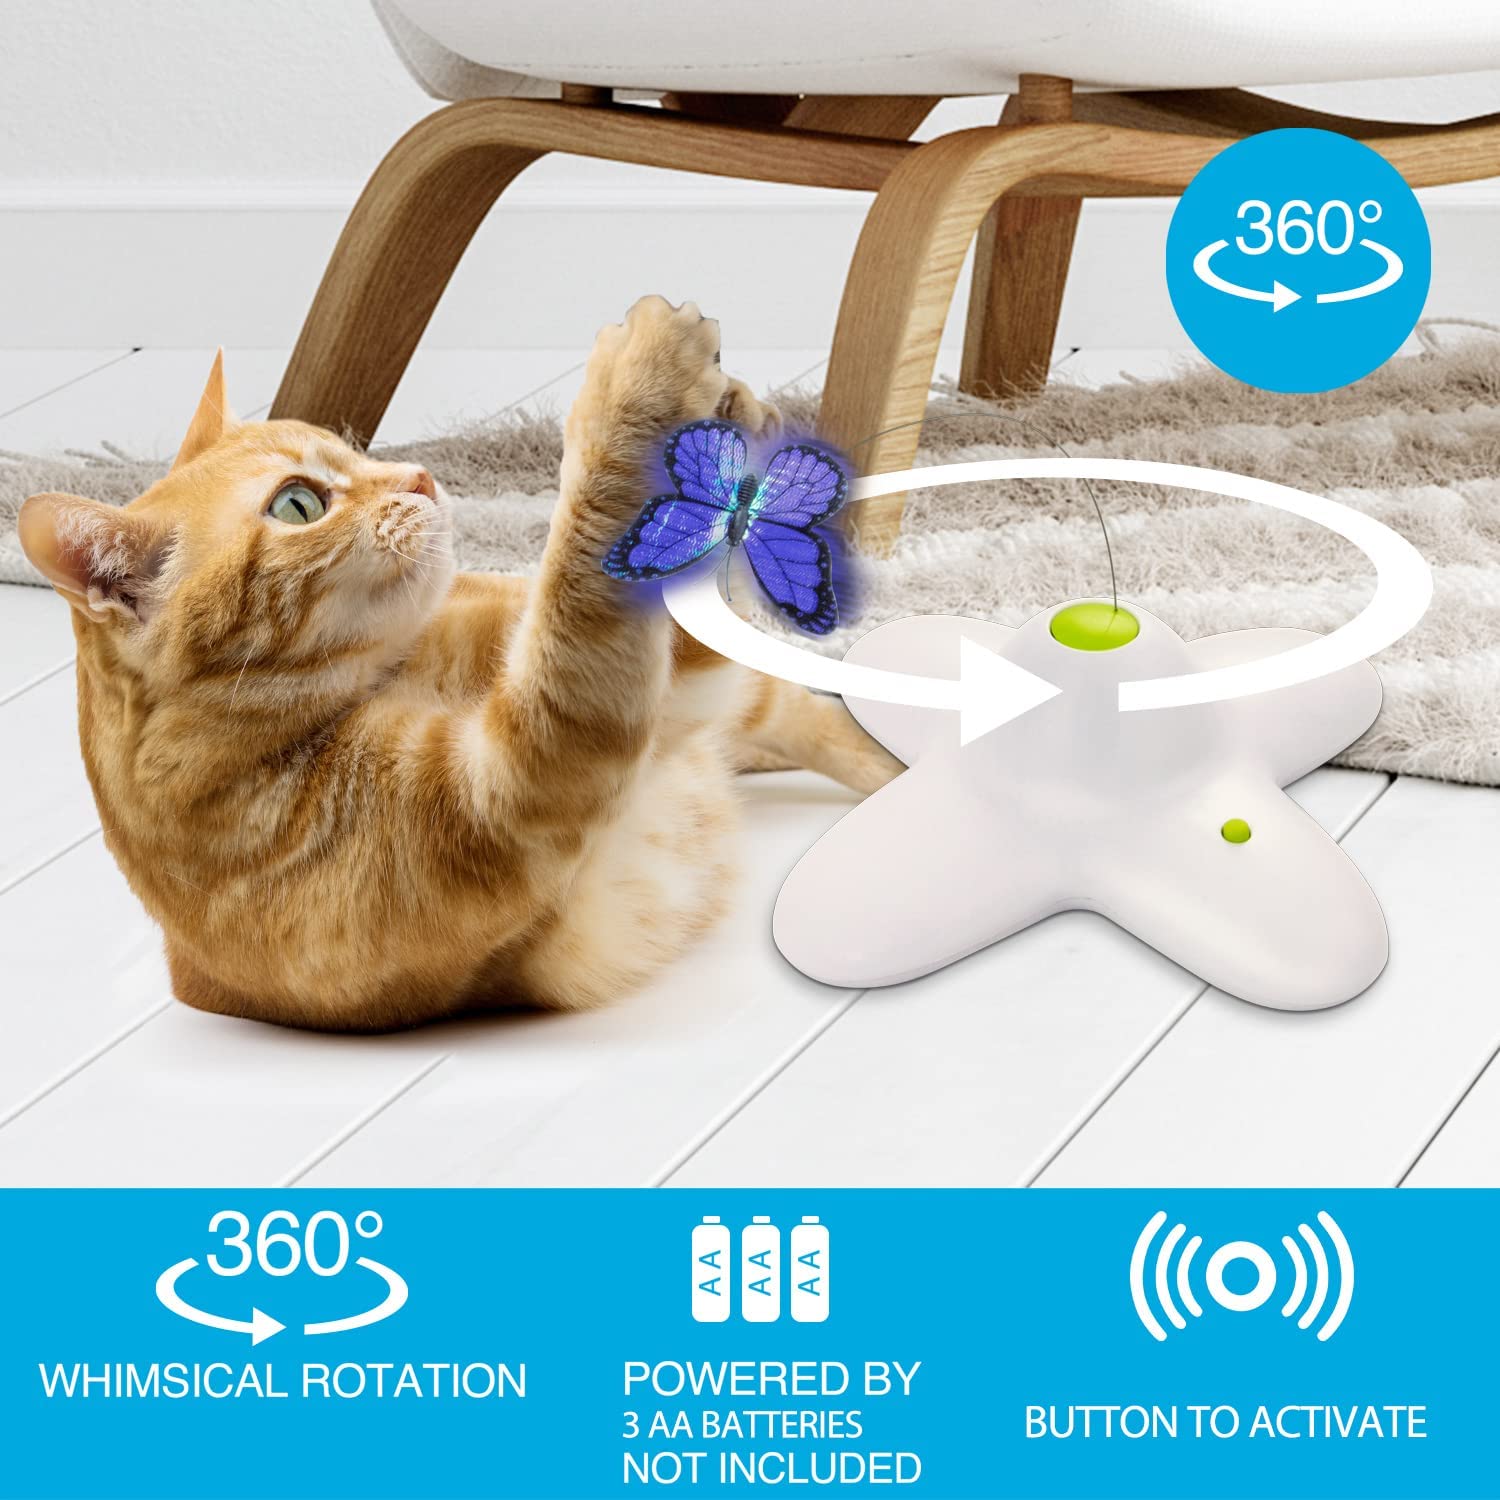 All For Paws Flutter Bug Rotating Butterfly Interactive Cat Toy